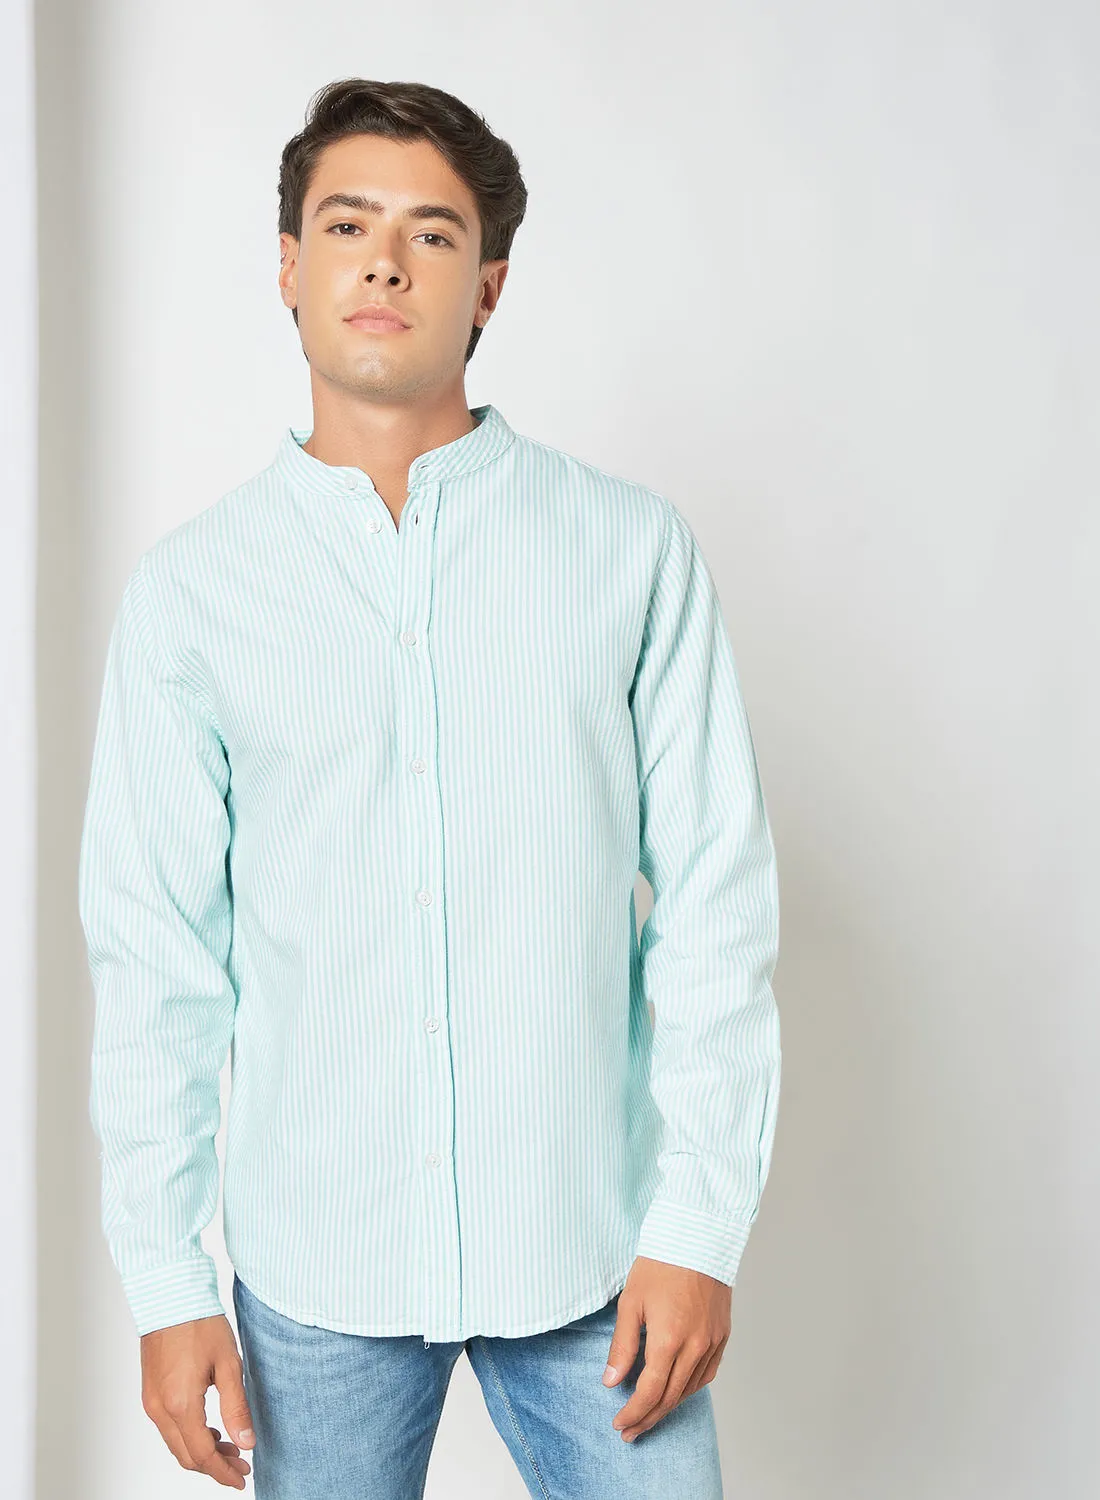 STATE 8 Long Sleeve Striped Shirt Multicolour